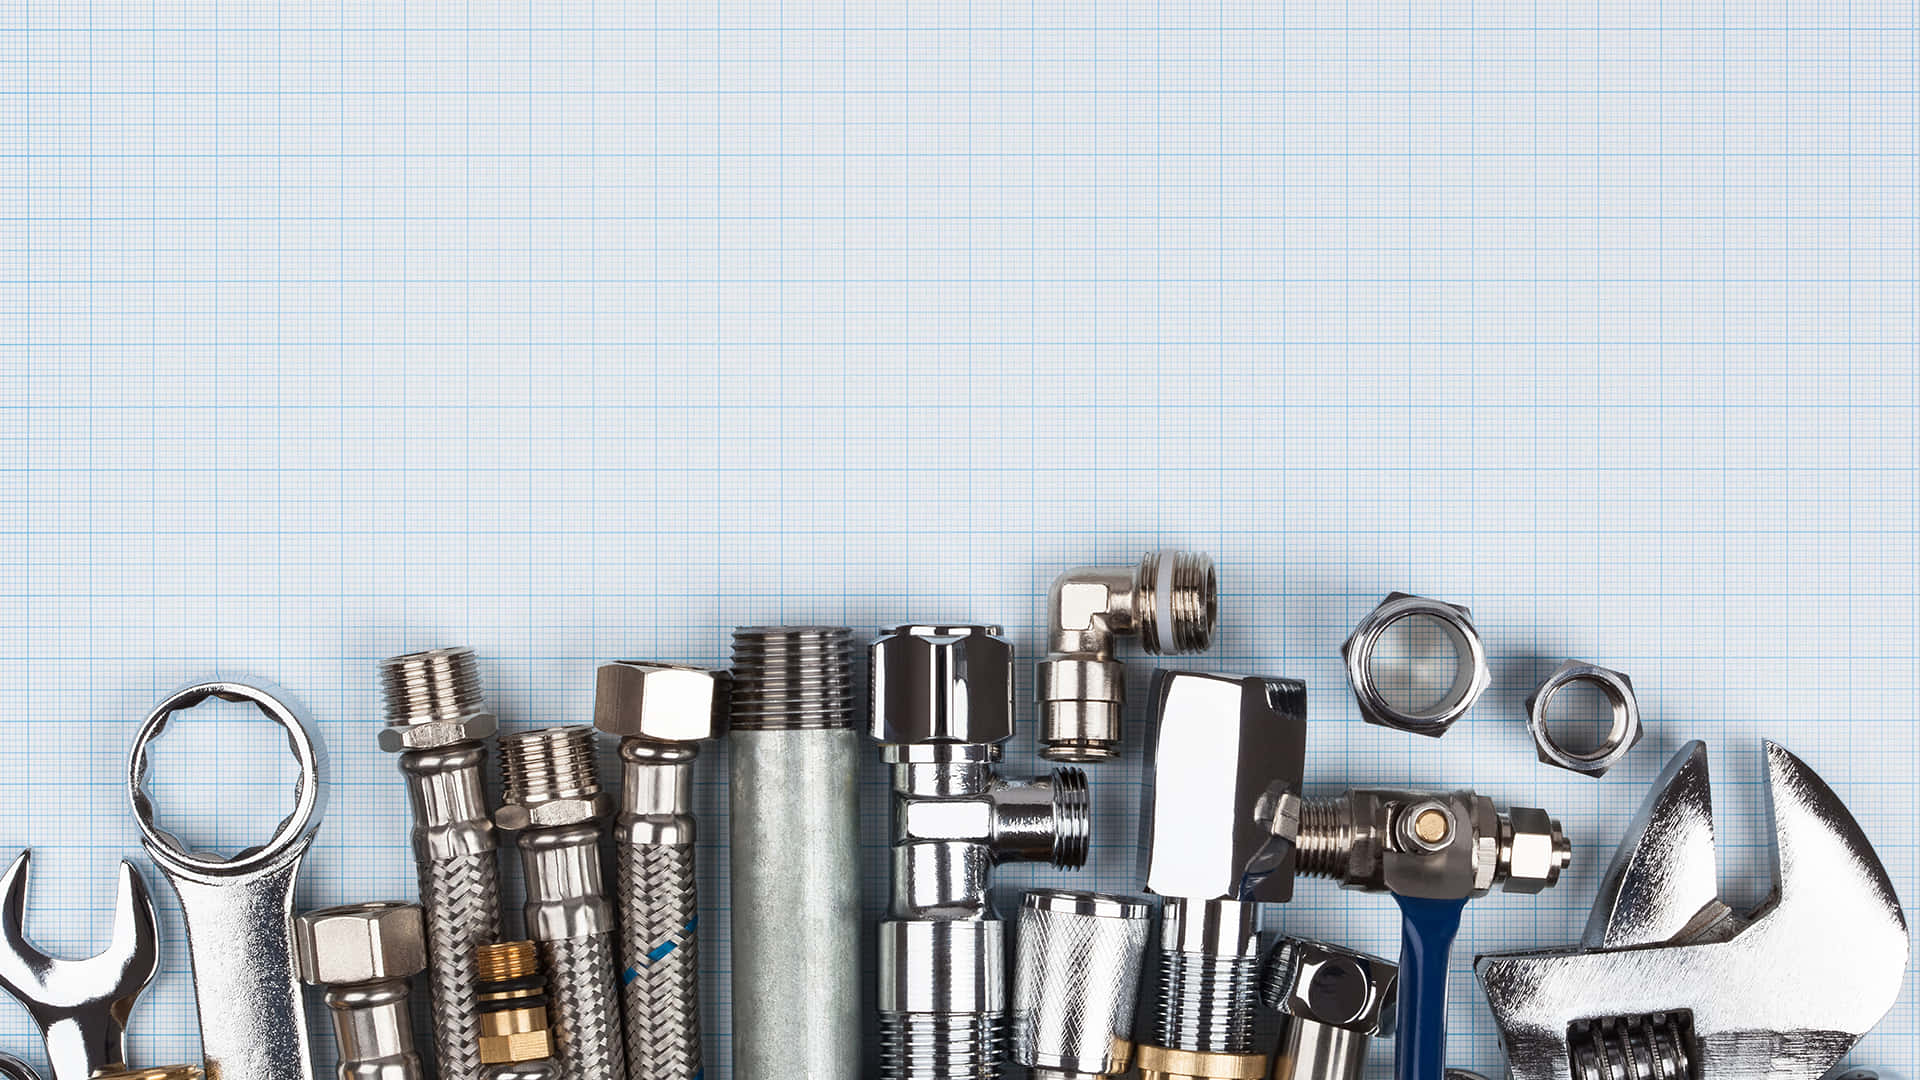 Plumbing Tools And Fittings On White Gridlines Wallpaper